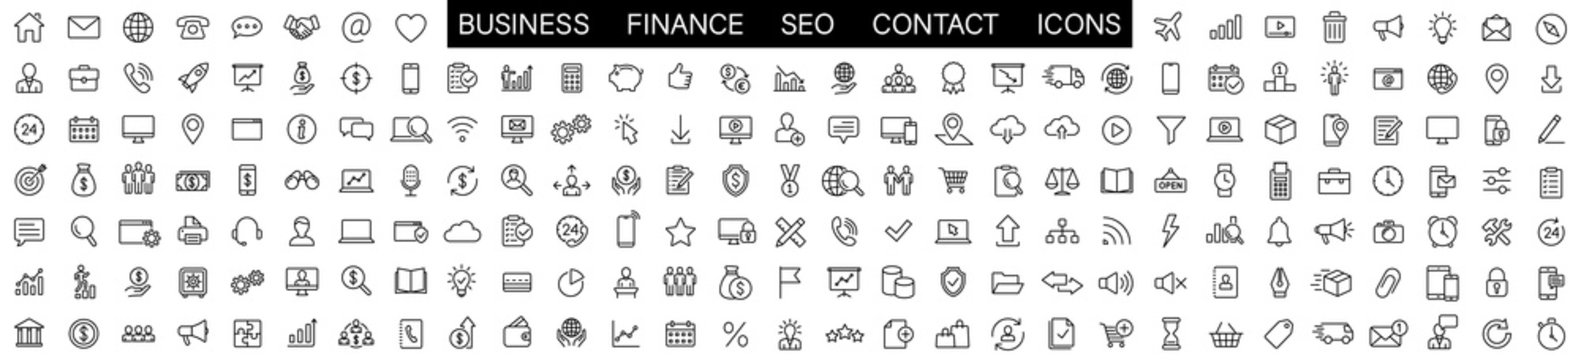 Thin line icons big set. Icons Business Office Finance Marketing Shopping SEO Contact.